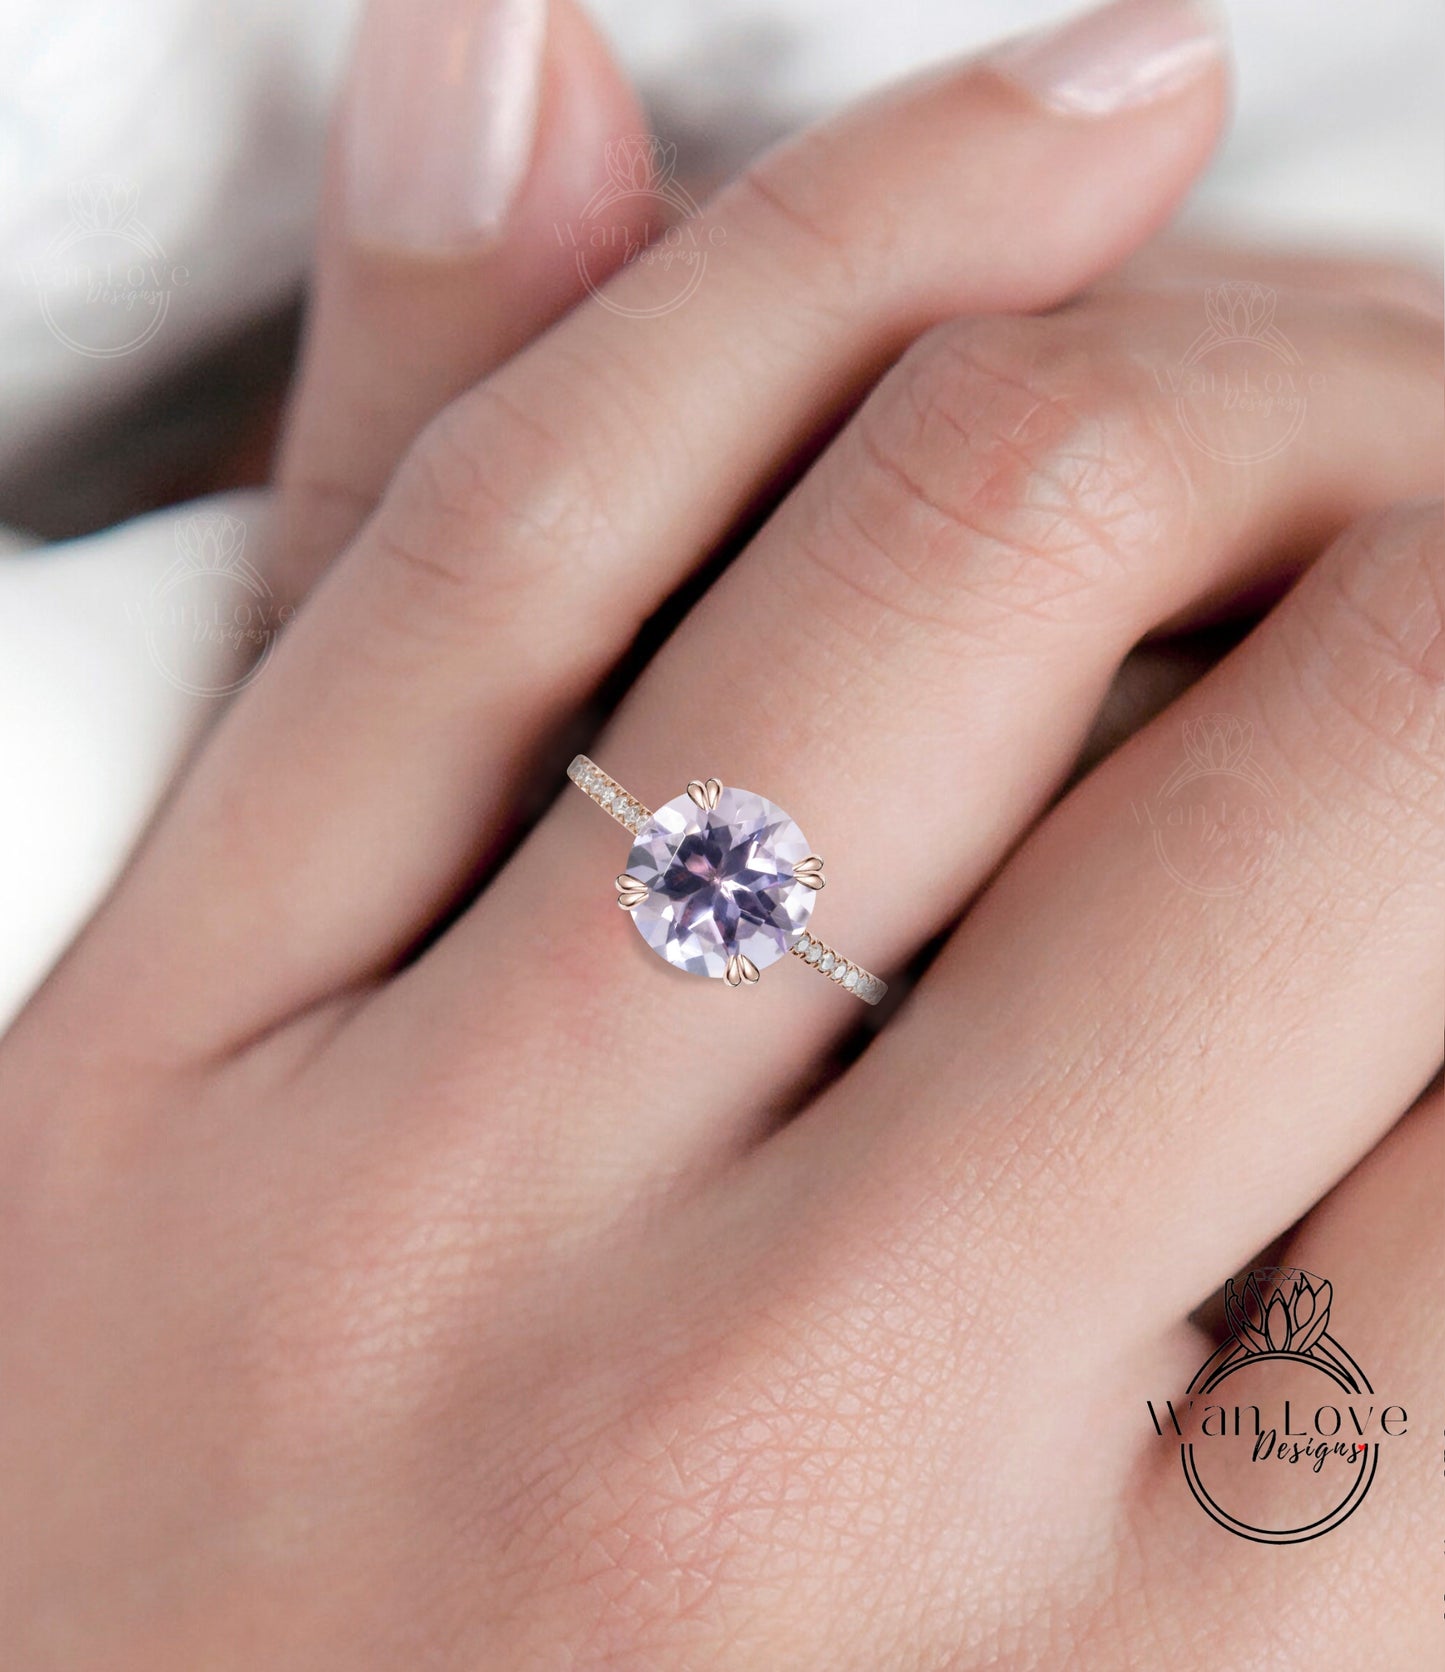 Light Lavender Amethyst & Diamond Engagement Ring, Round, Cathedral Custom made, Wedding, Anniversary Gift, Commitment, Proposal